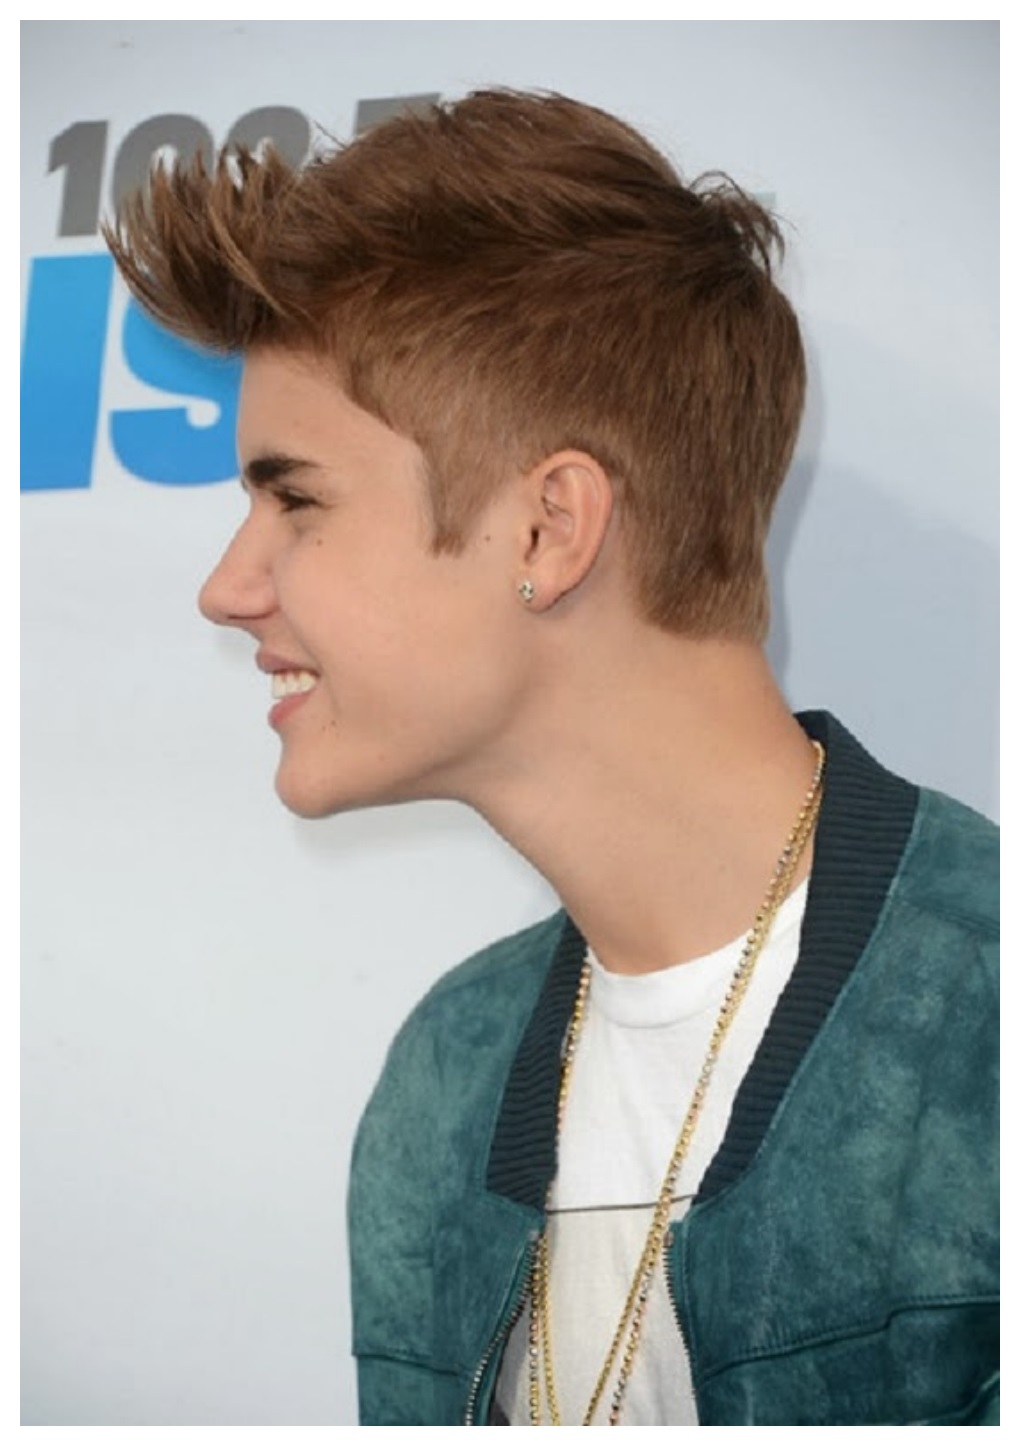 Army style Justin Bieber Hairstyle free